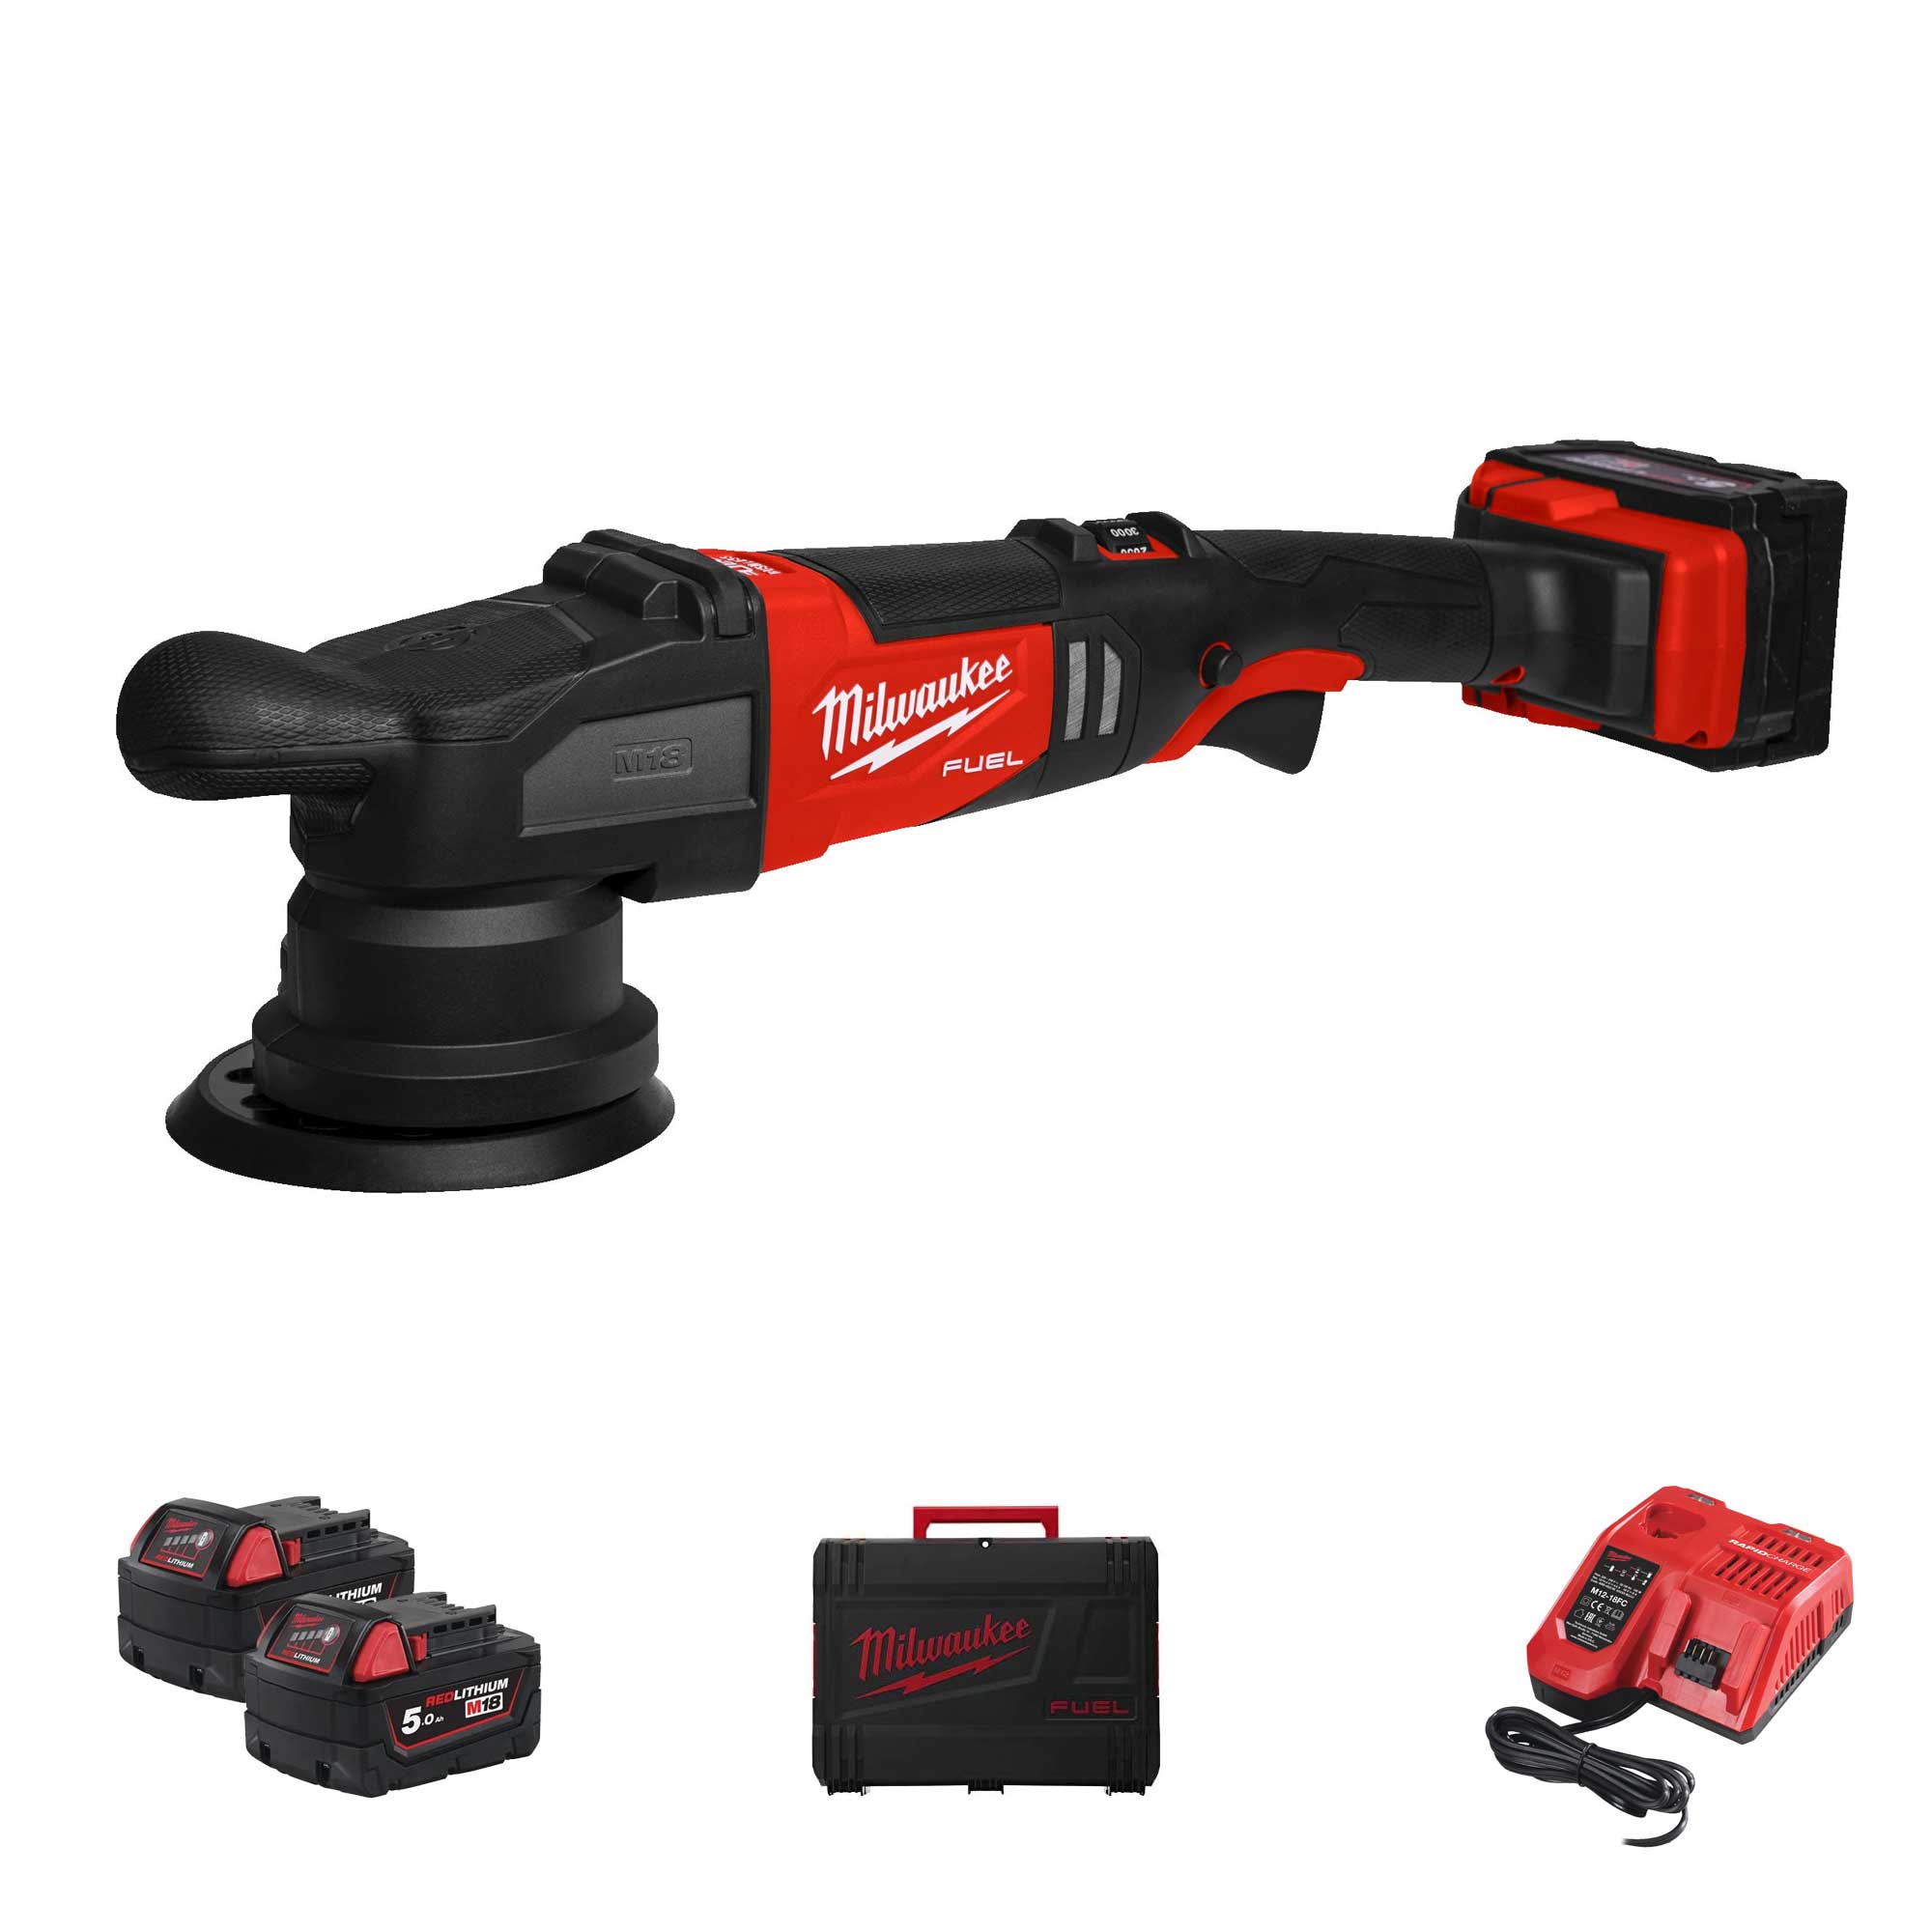 Lucidatrice Milwaukee M18 FROP15-502X 18V 5.0 Ah